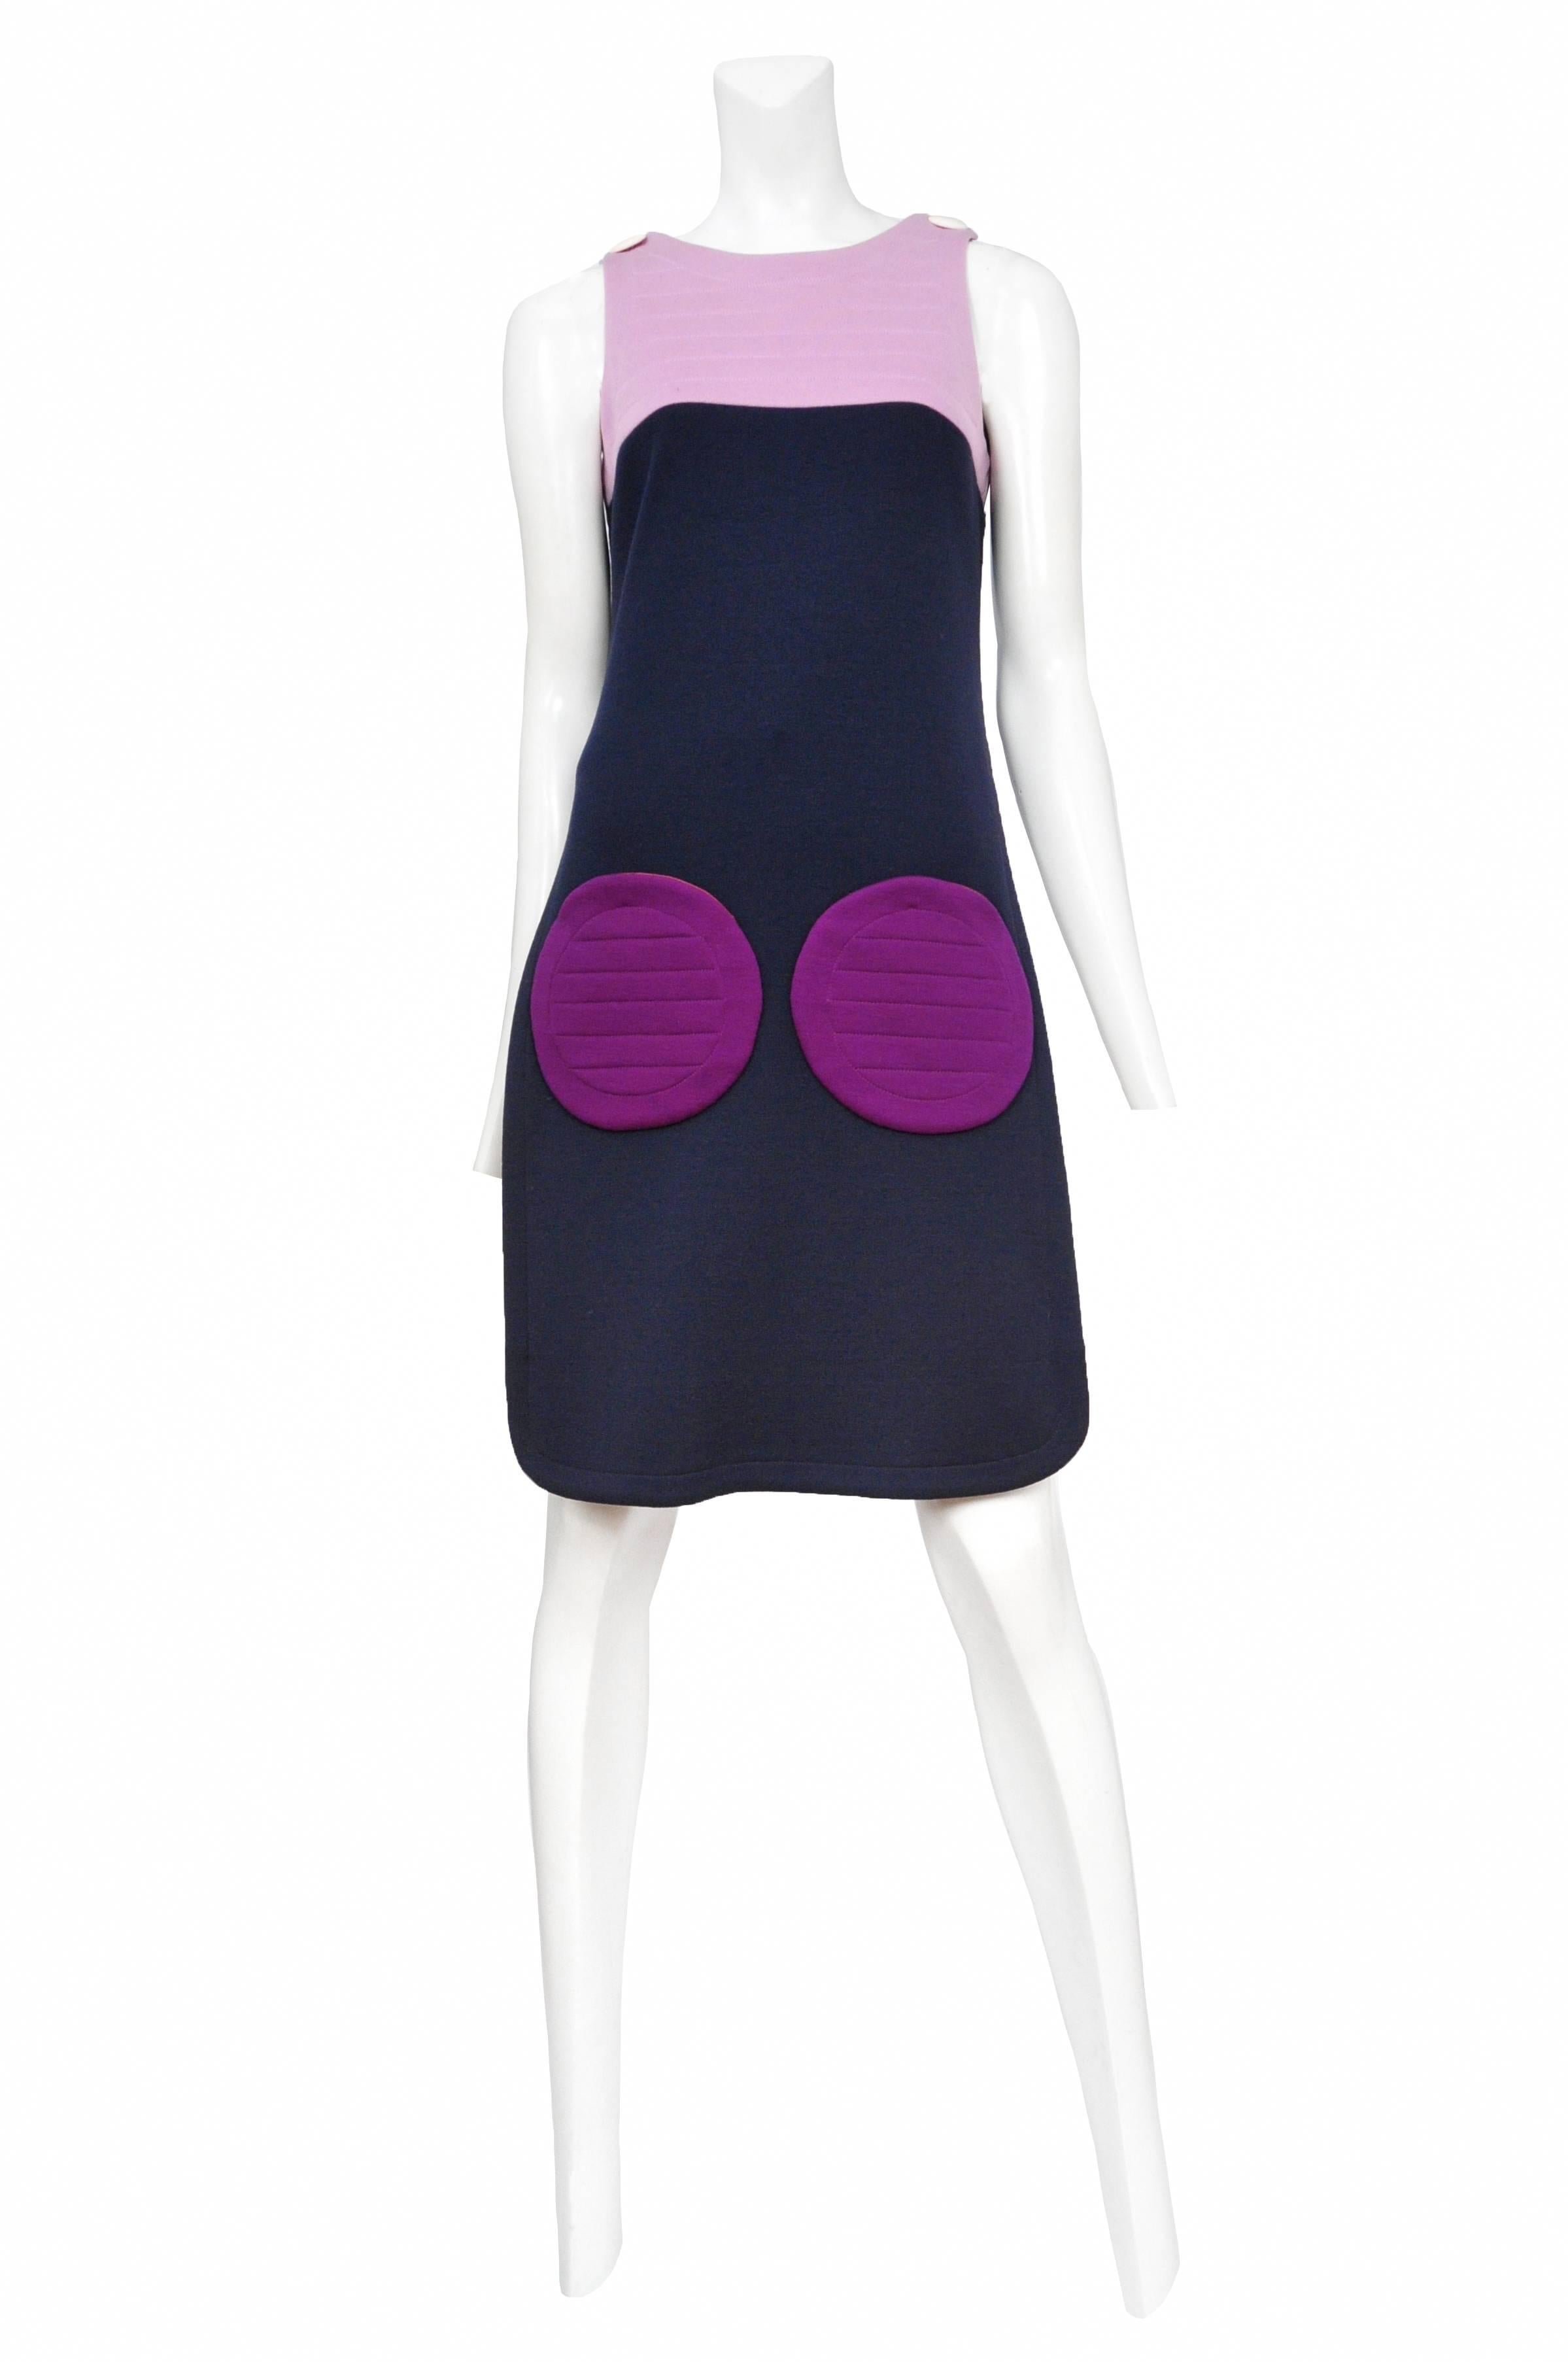 Dark purple wool mini dress with rounded skirt and neckline. Light lavender bust with horizontal top stitch detail and true purple round patch pockets at front. Zip back closure.